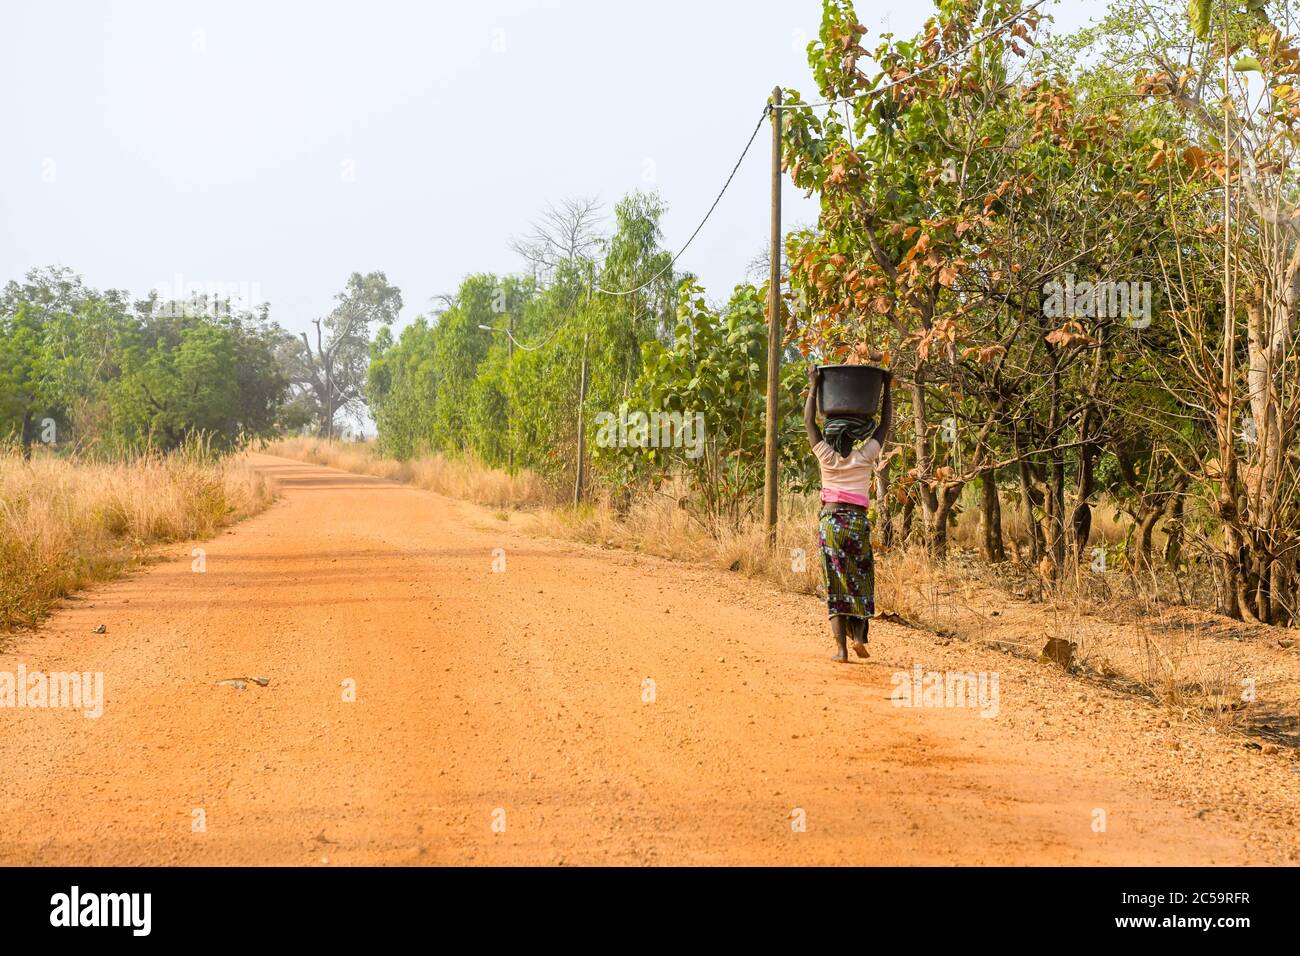 Africa, West Africa, Benin, Natitinqou. A woman walks with a bucket on her head on a dirt road in northern Benin. Stock Photo